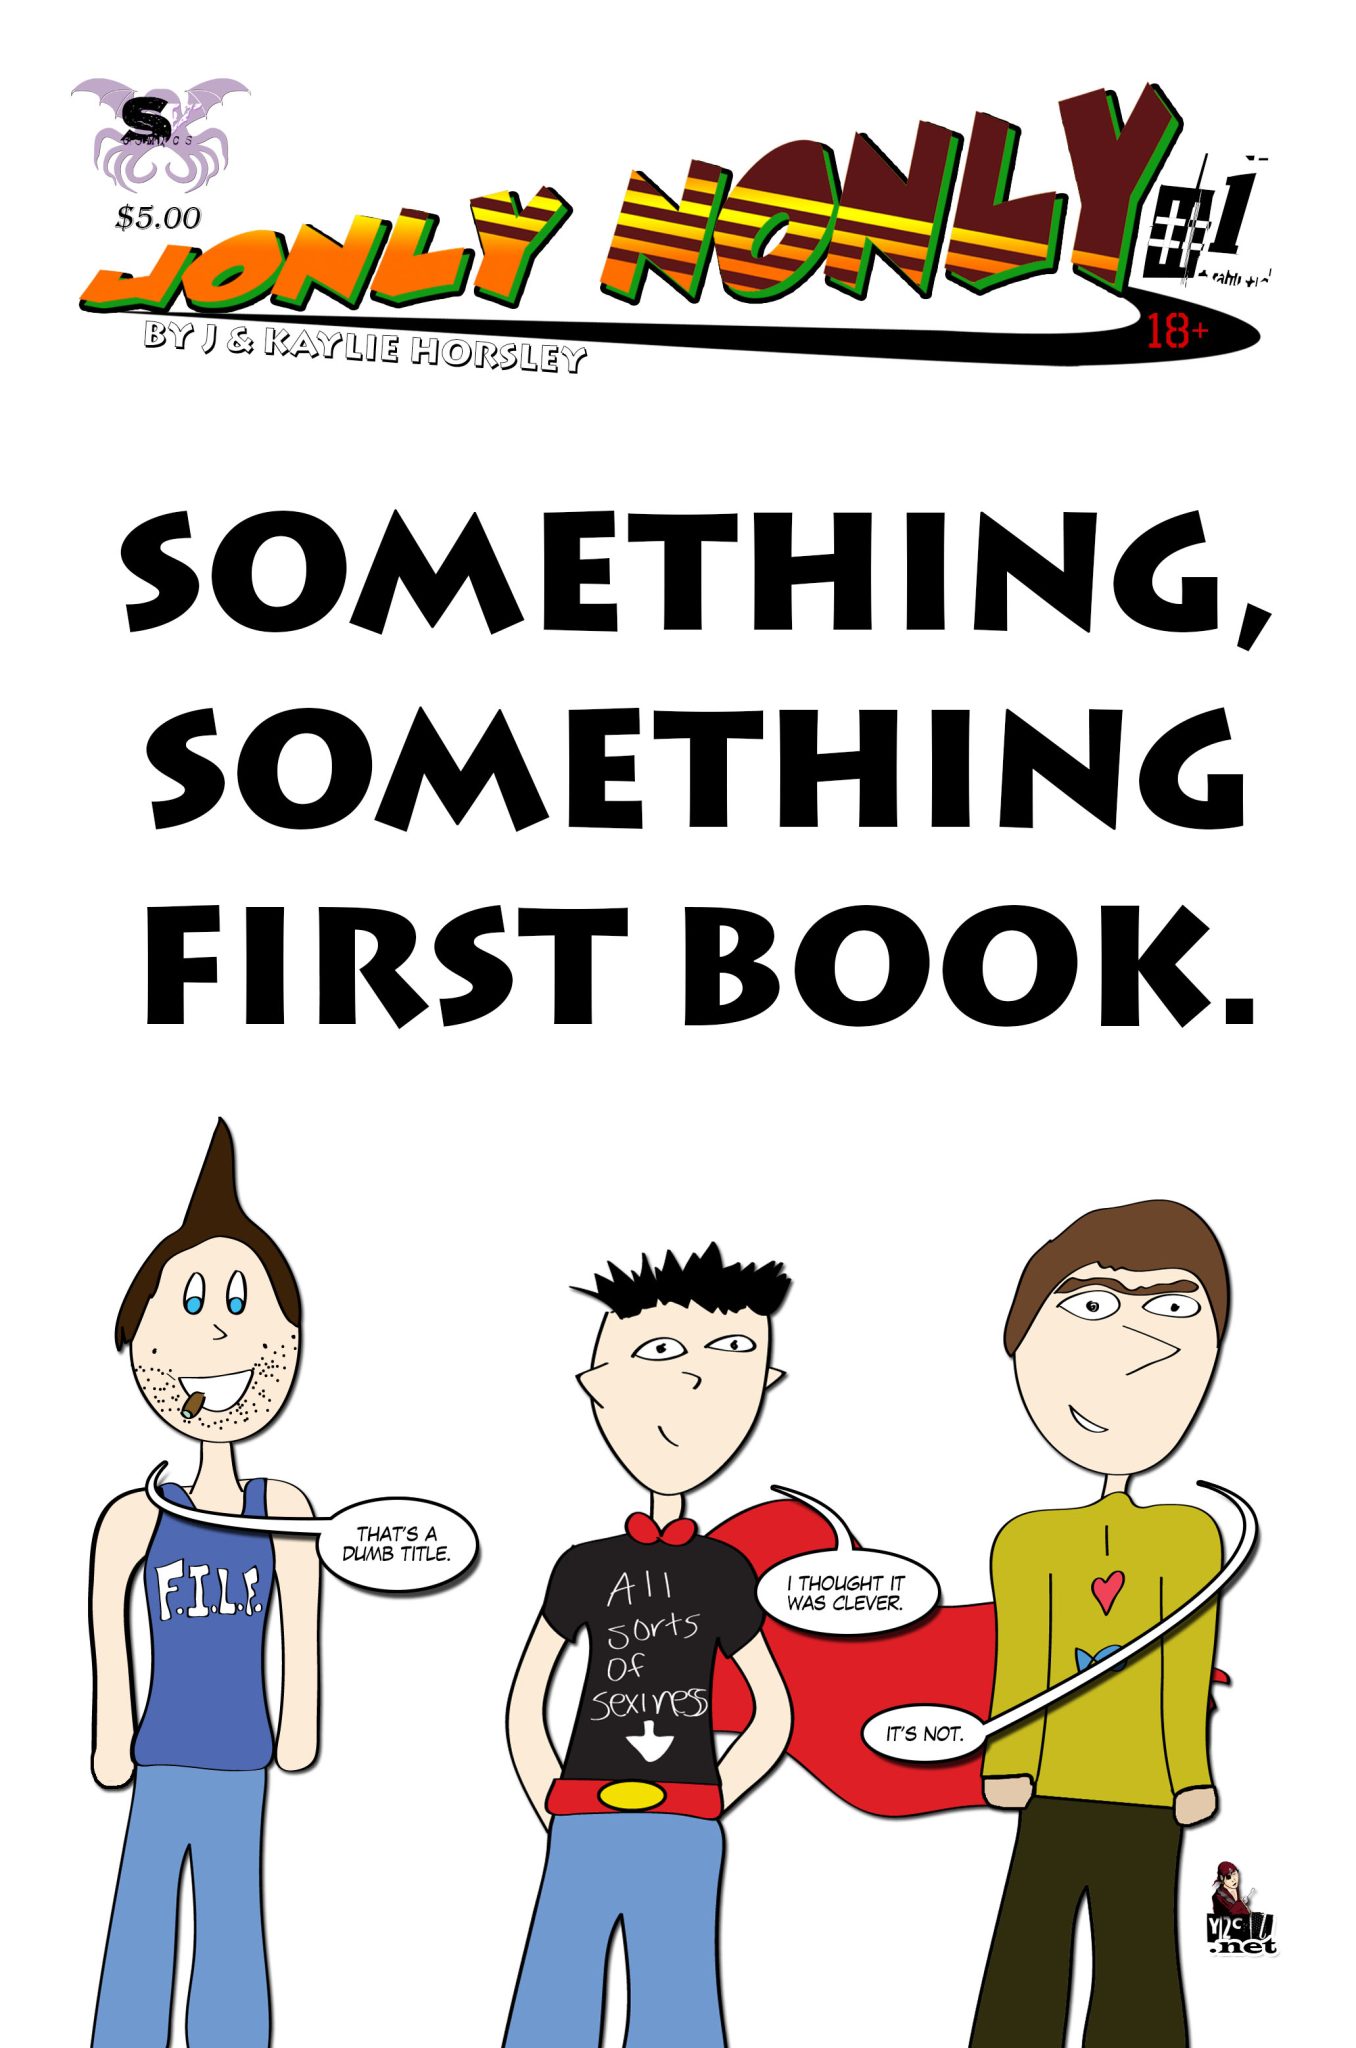 Jonly Nonly #1 - Something, Something First Book